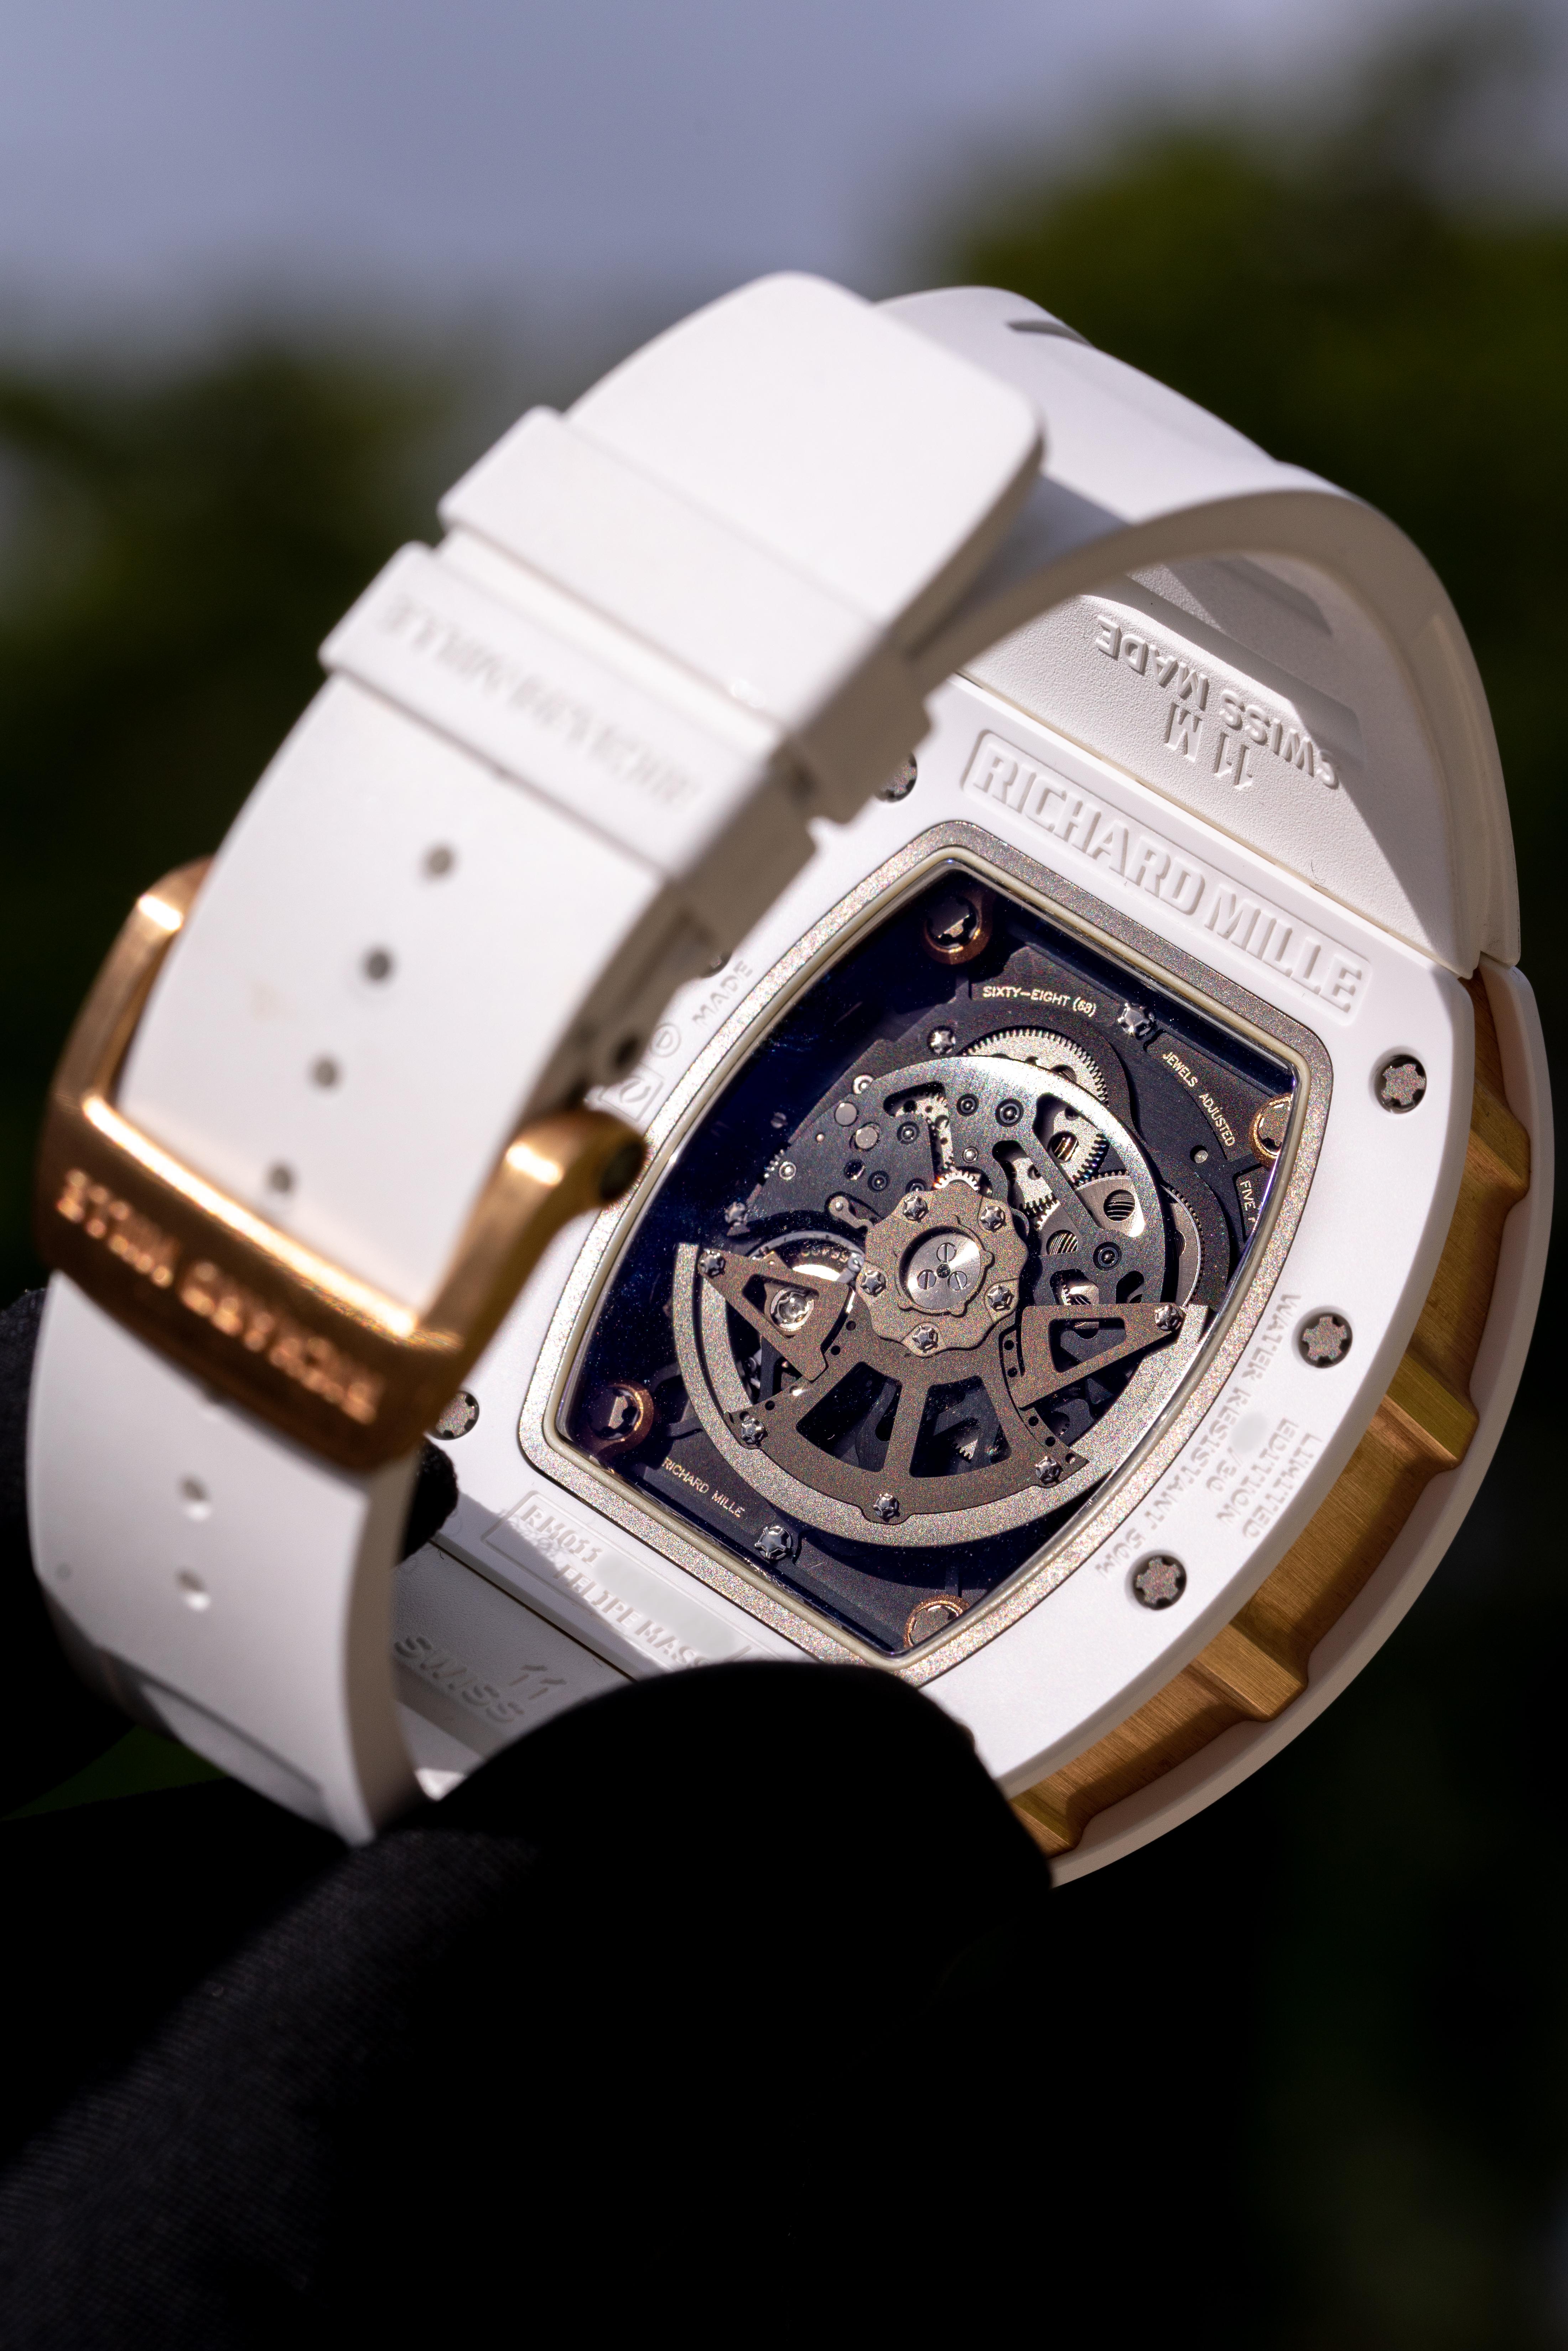 Richard Mille RM011 18k Rose Gold White Demon Chronograph Watch For Sale 5